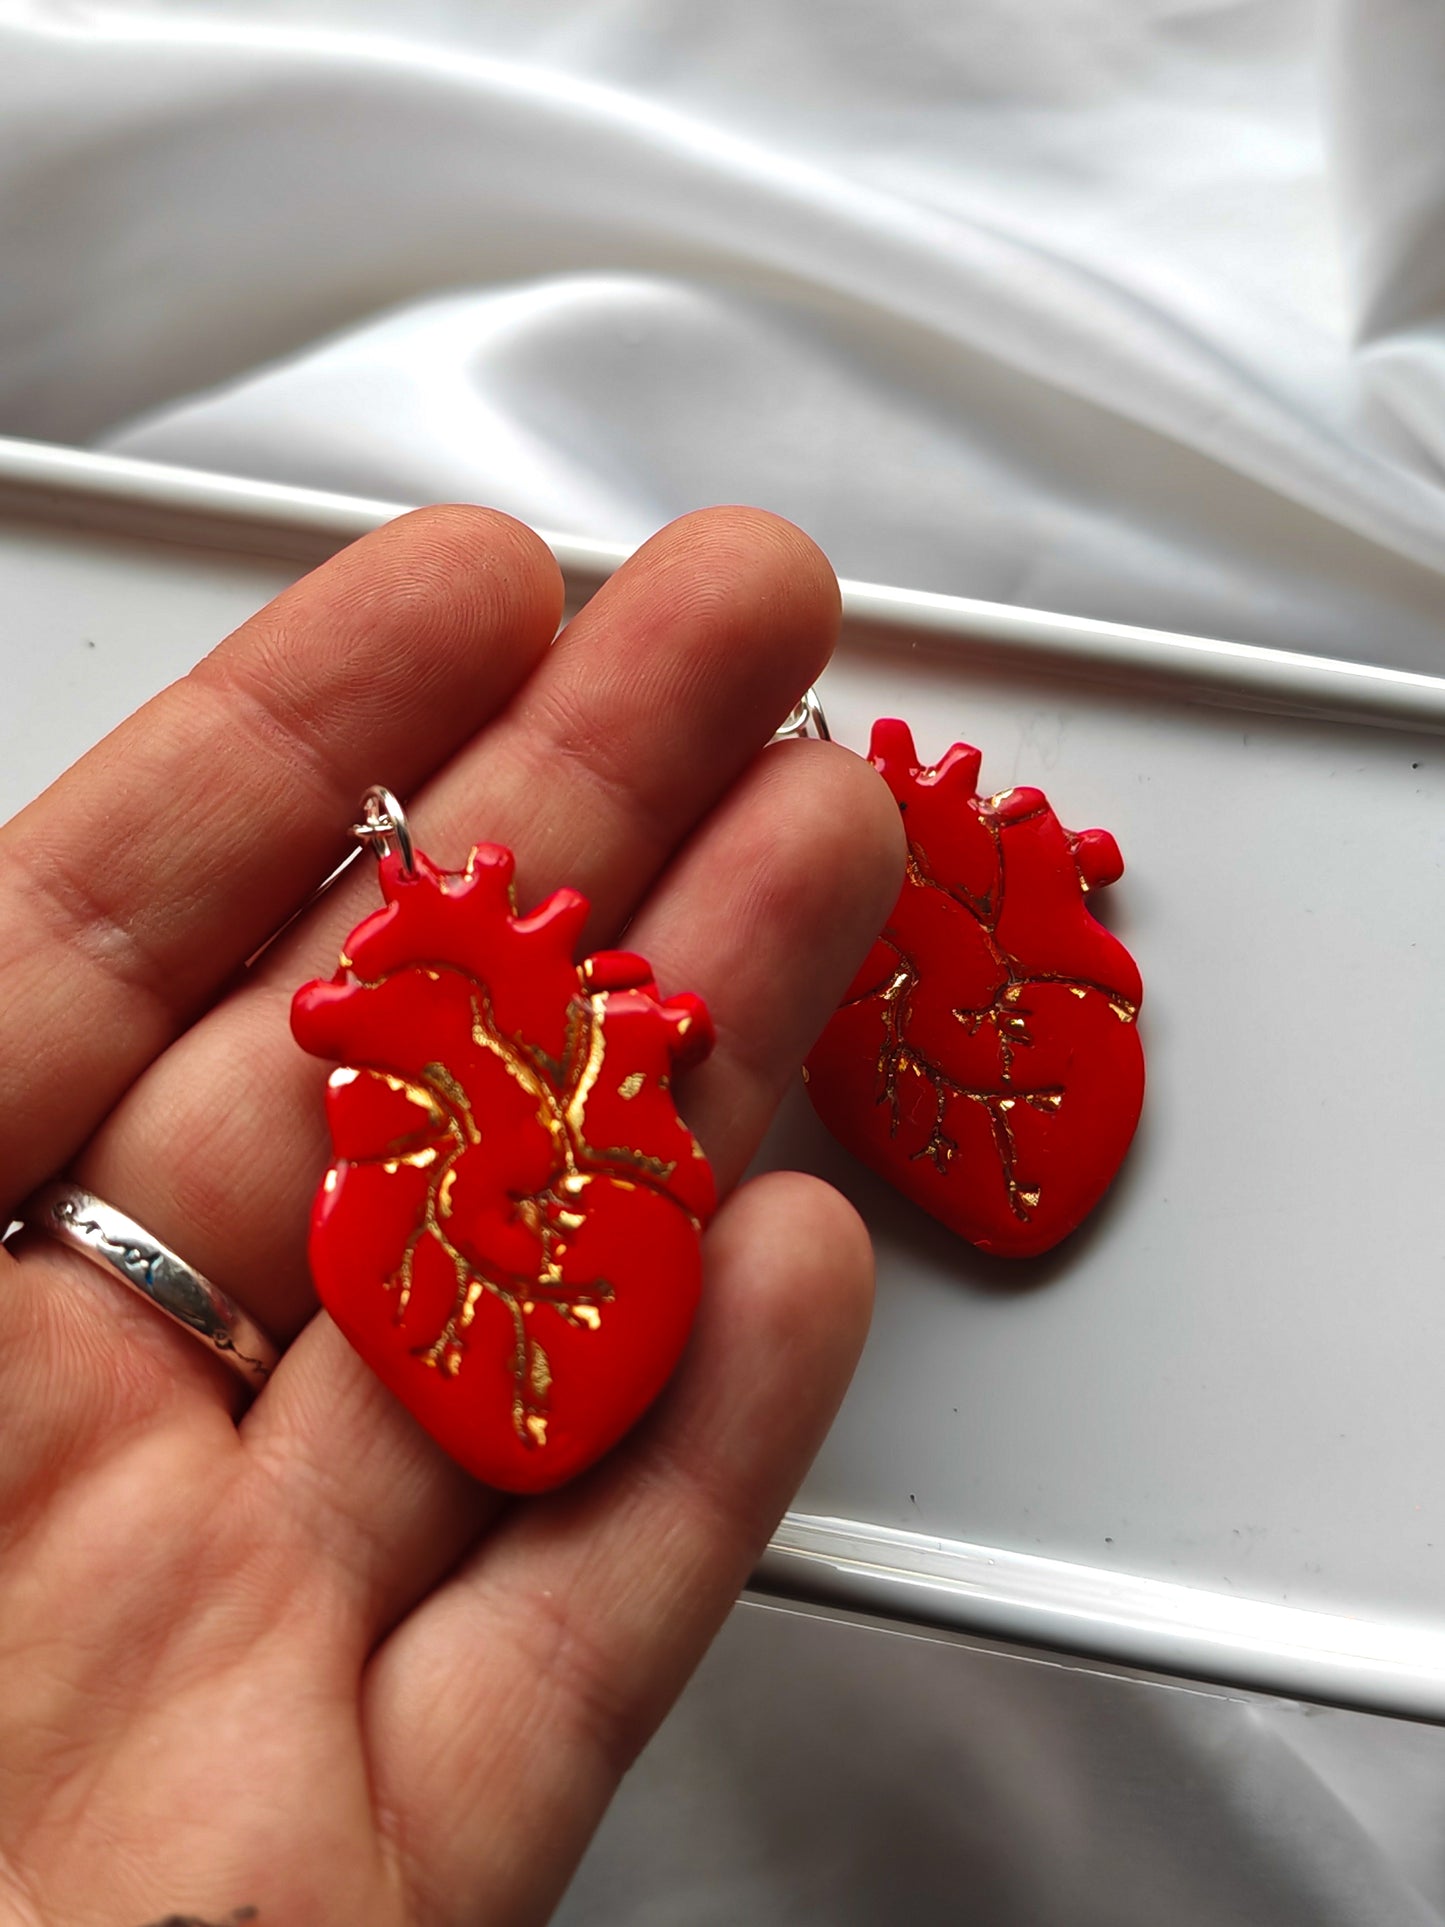 Red and gold anatomical heart earrings